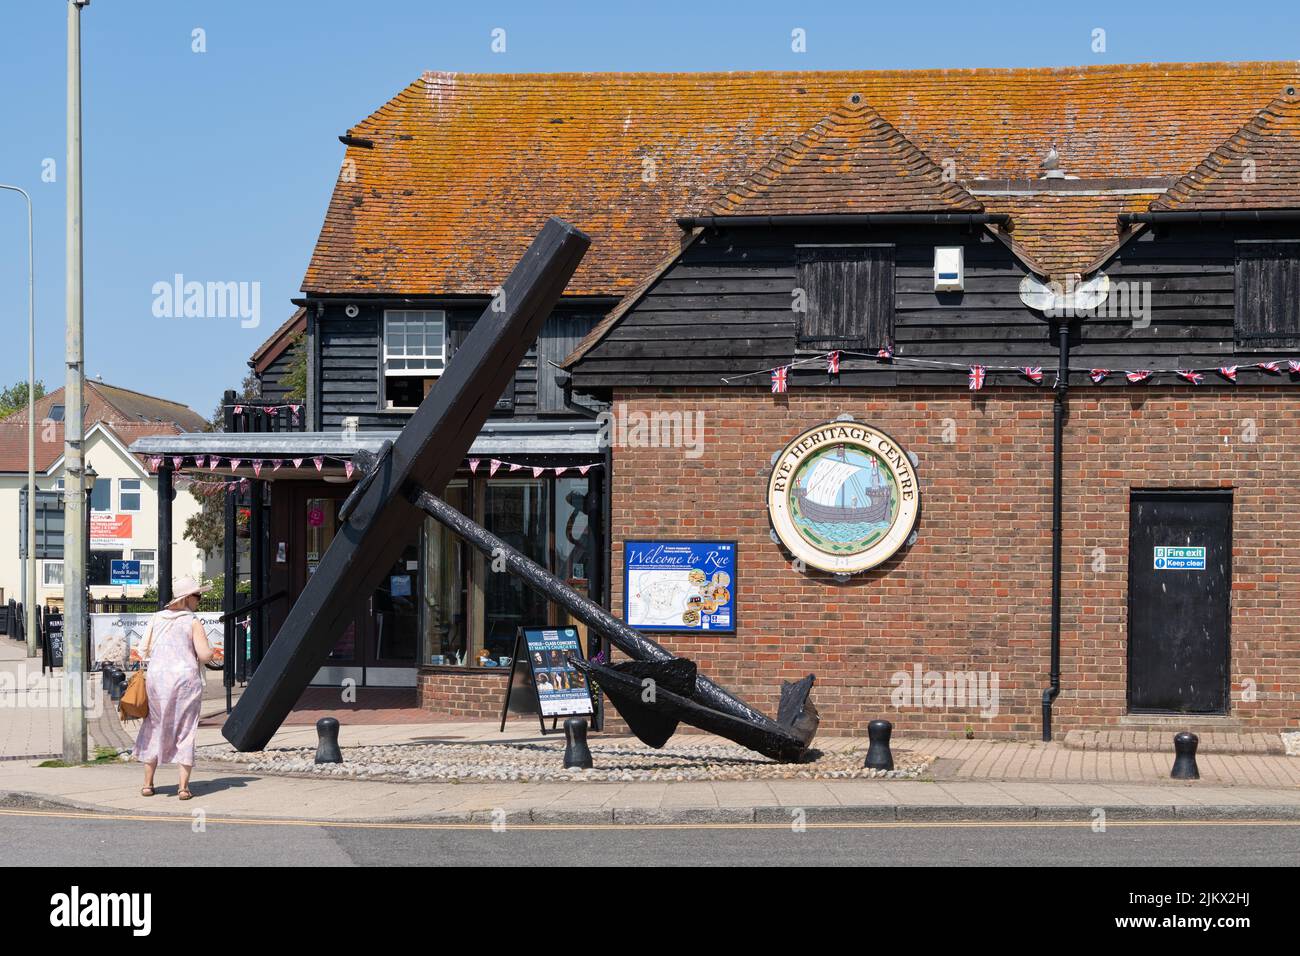 Rye Heritage Centre, Rye, East Sussex, Angleterre, Royaume-Uni Banque D'Images